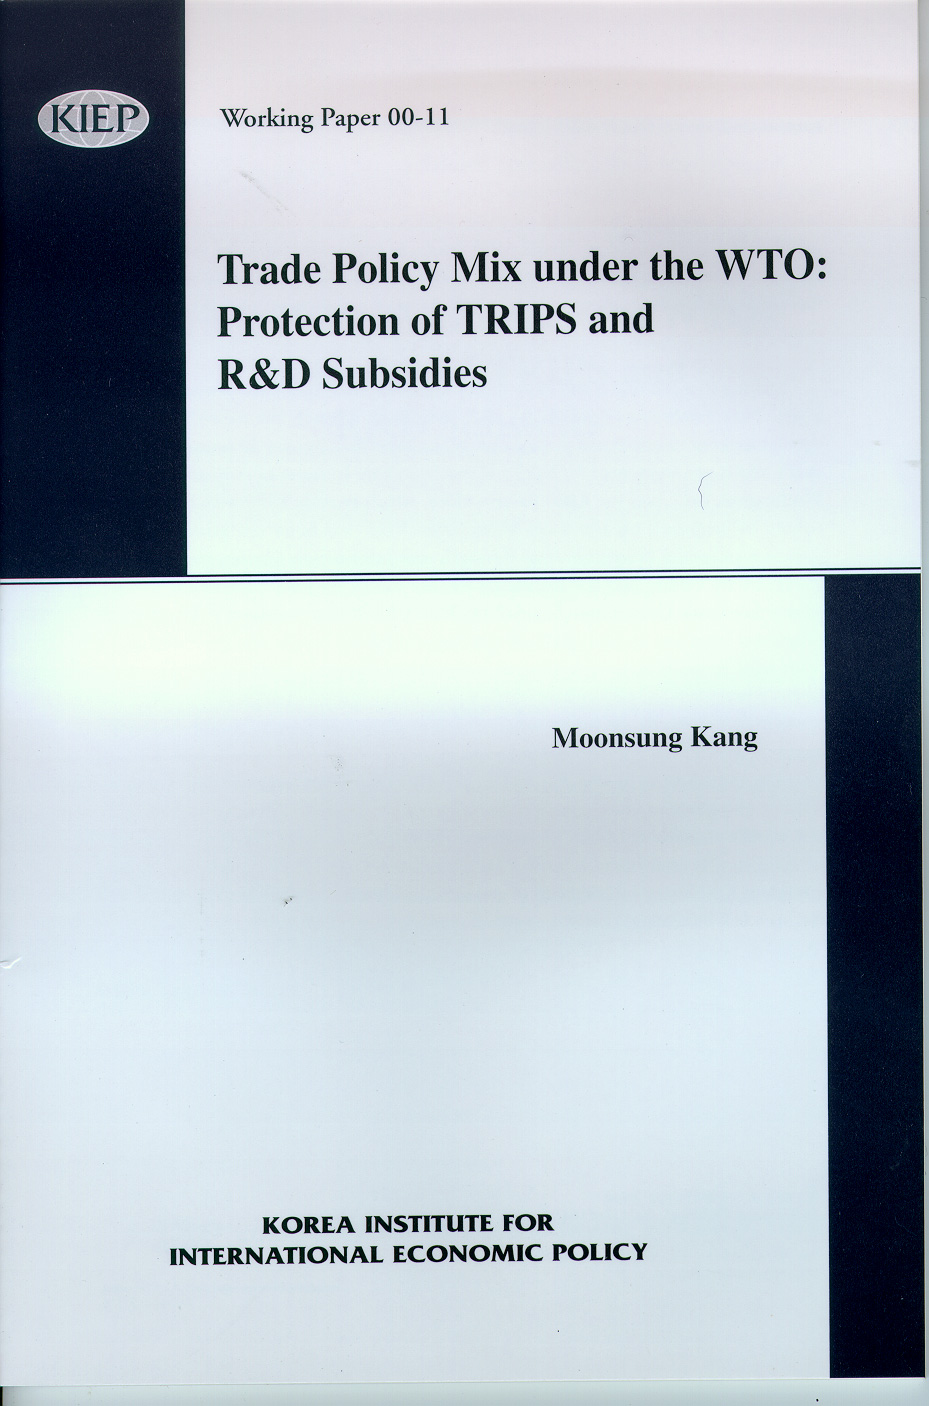 Trade Policy Mix under the WTO: Protection of TRIPS and R&D Subsidies